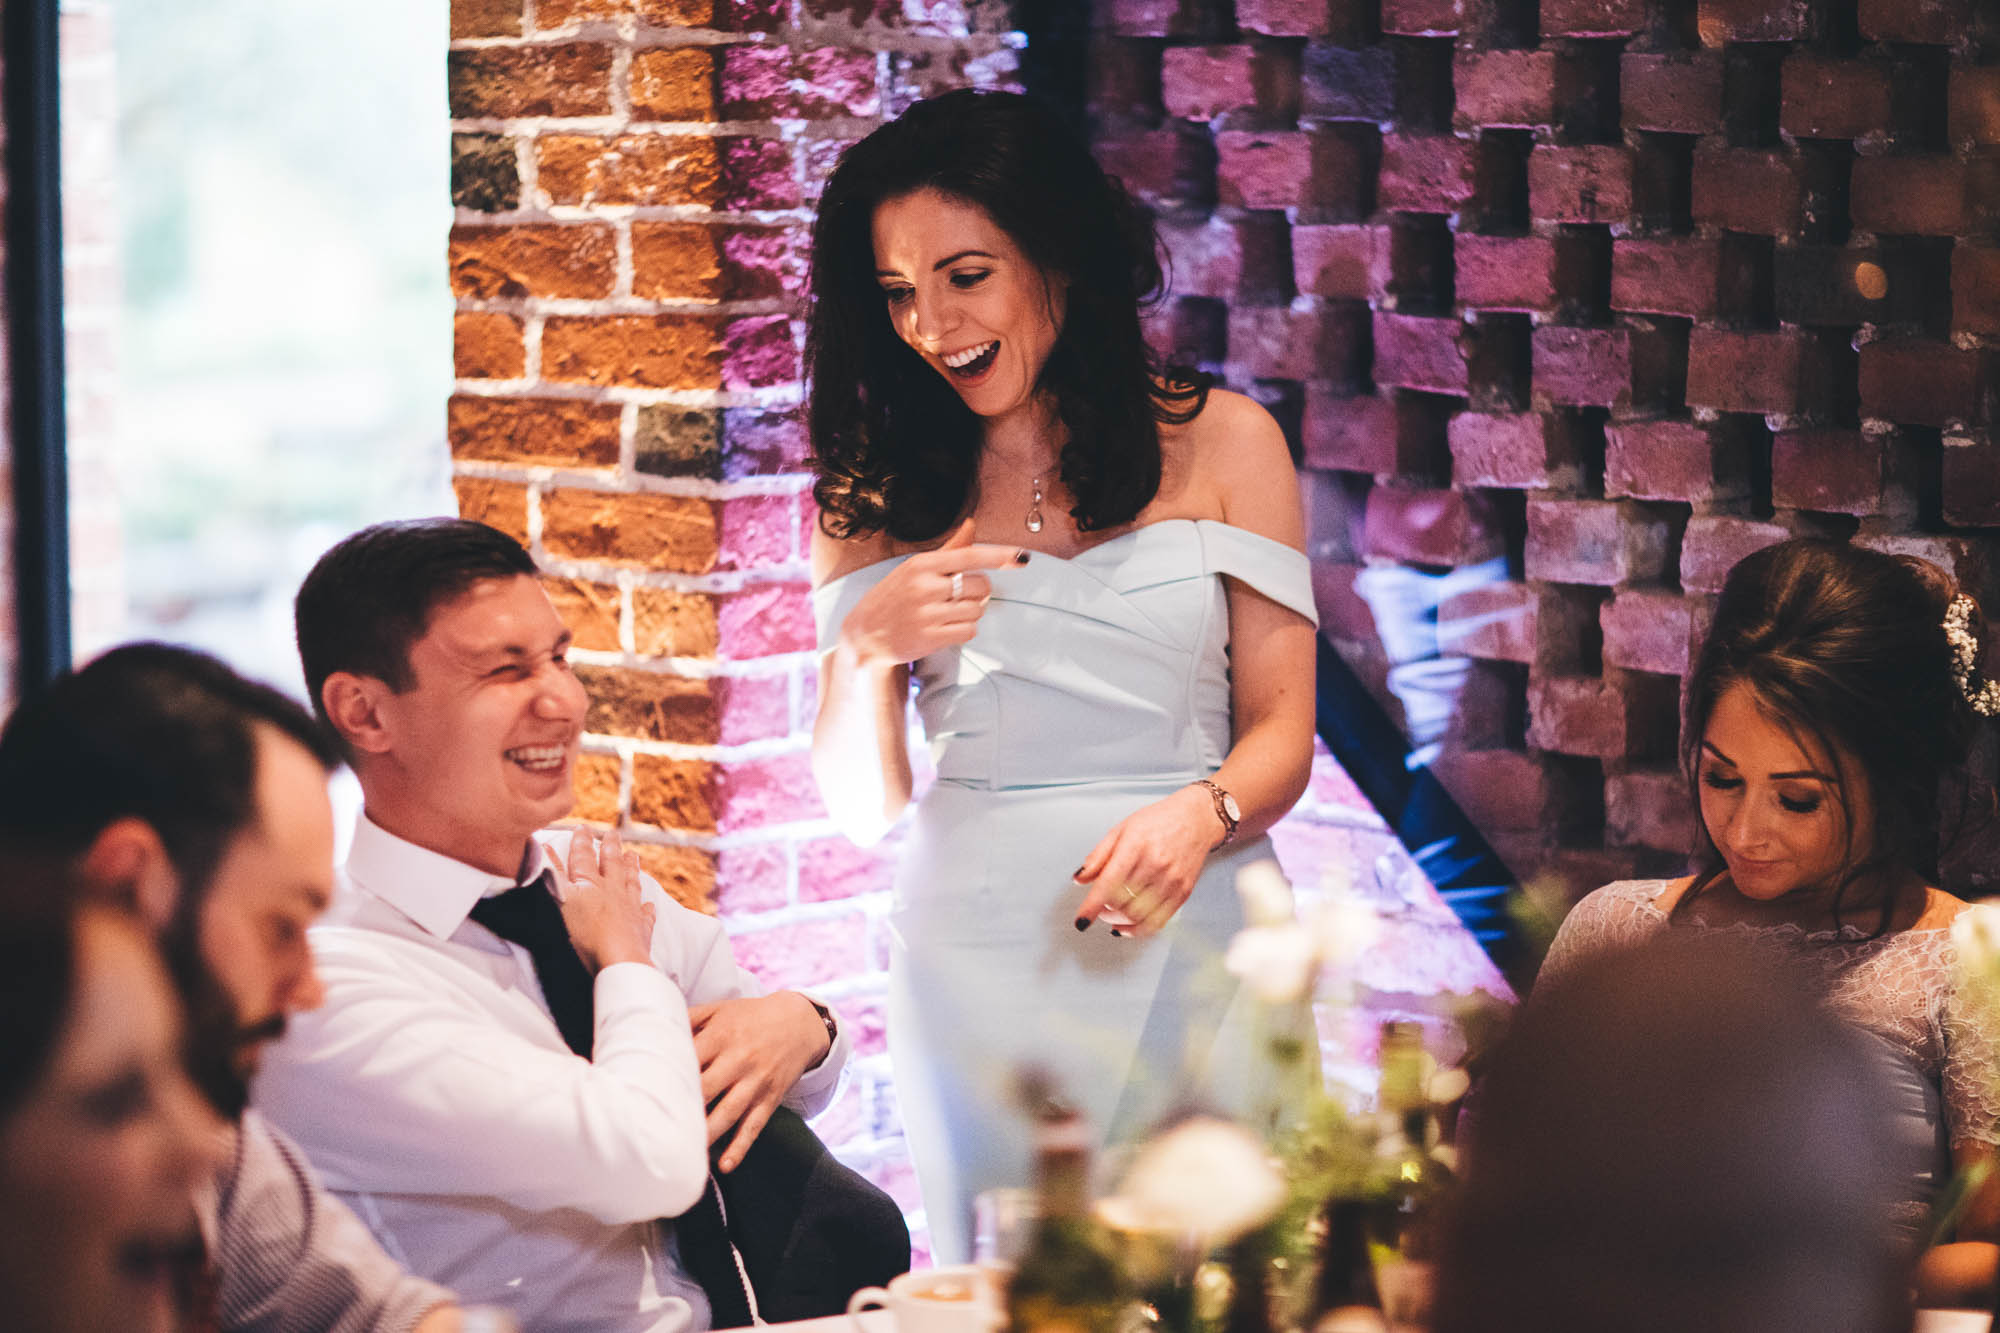 Wedding guest stands up as she is told a joke at reception dinner